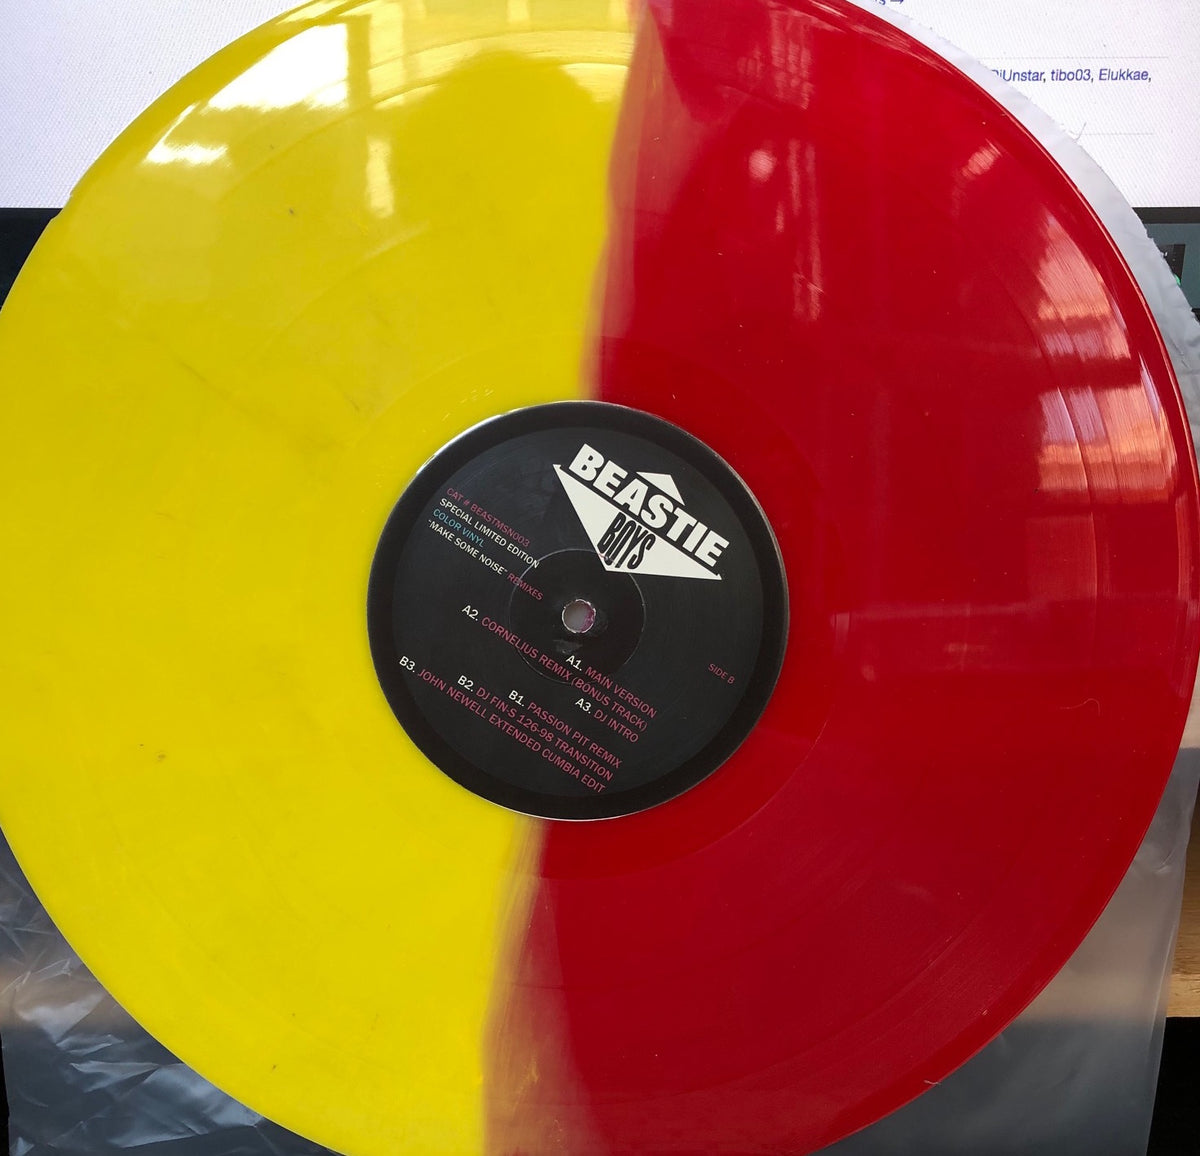 Beastie Boys ‎– Make Some Noise (Remixes) - New EP Record 2011 Europe  Import Red & Yellow Vinyl - Hip Hop